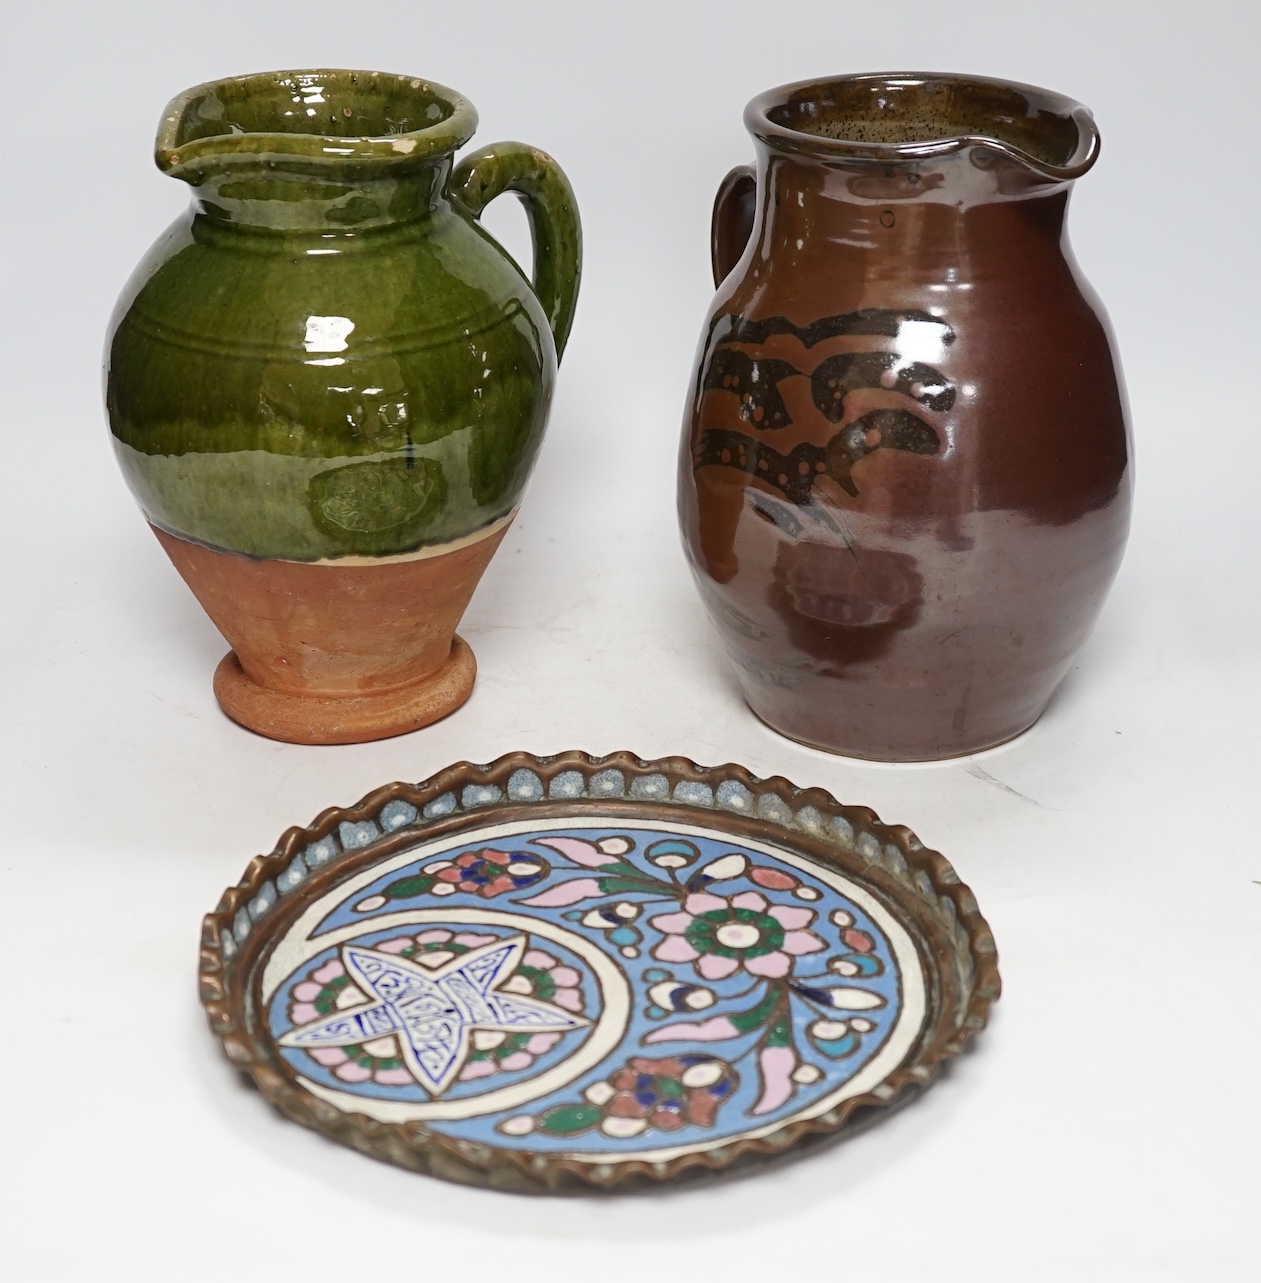 From the Studio of Fred Cuming. Two studio green and brown glazed jugs together with an enamelled stylised floral dish, largest height 22cm. Condition - good